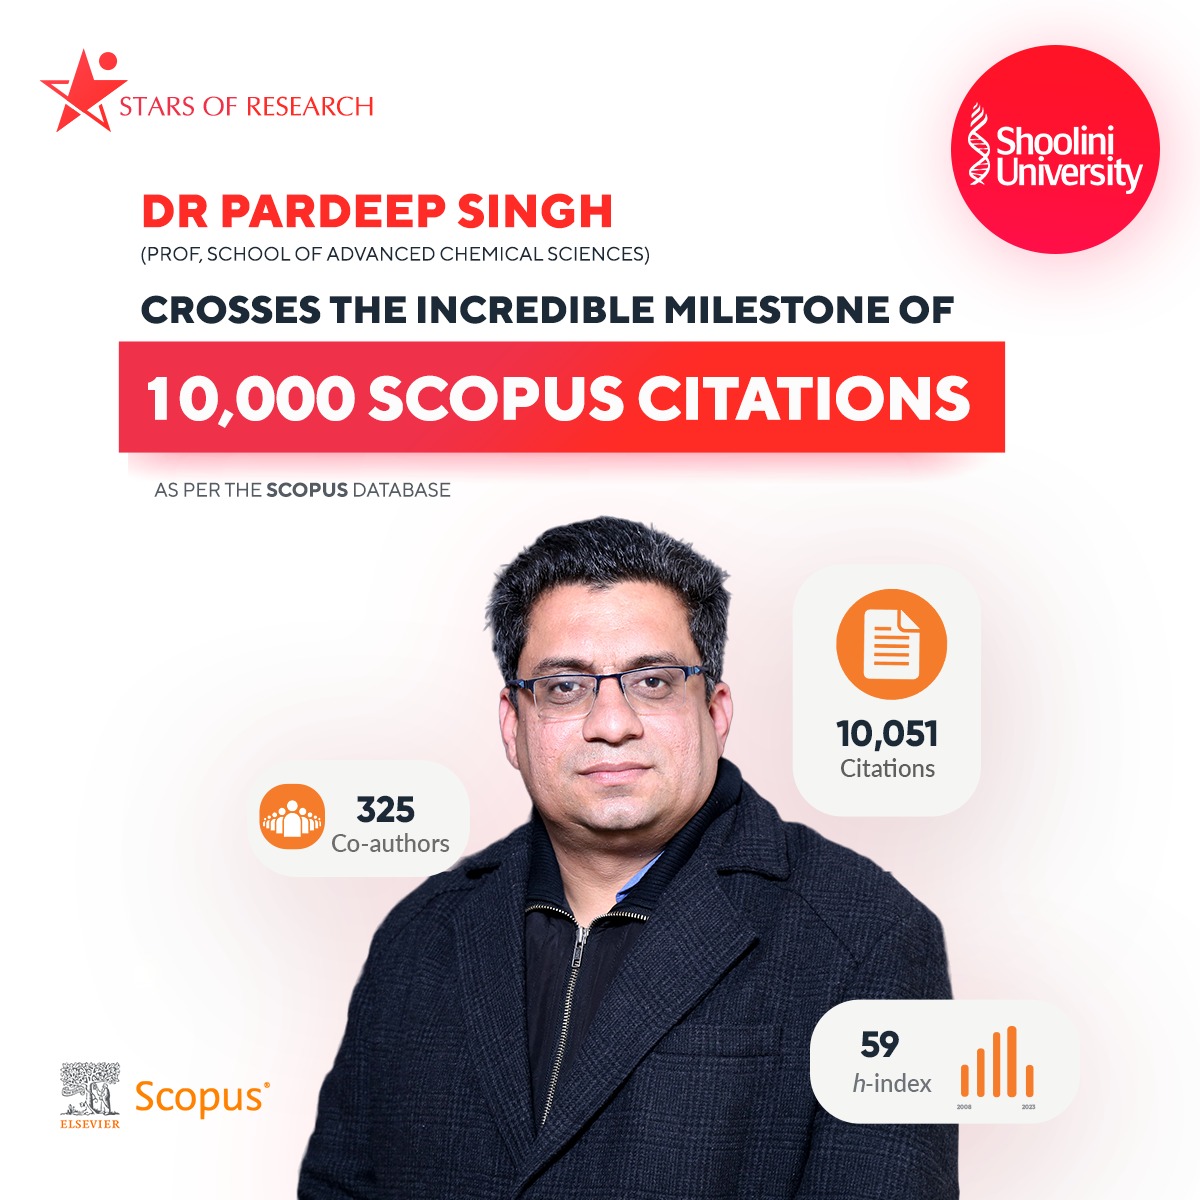 Shoolini Prof Reaches Incredible Milestone of 10K #Scopus Citations! 🤩
Congratulations Prof Pardeep Singh (School of Advanced #ChemicalSciences) for hard earned 10051 #Citations as per the ‘#ScopusData’.

#researchpaper #researcharticle #researchers #scholar  #ShooliniUniversity